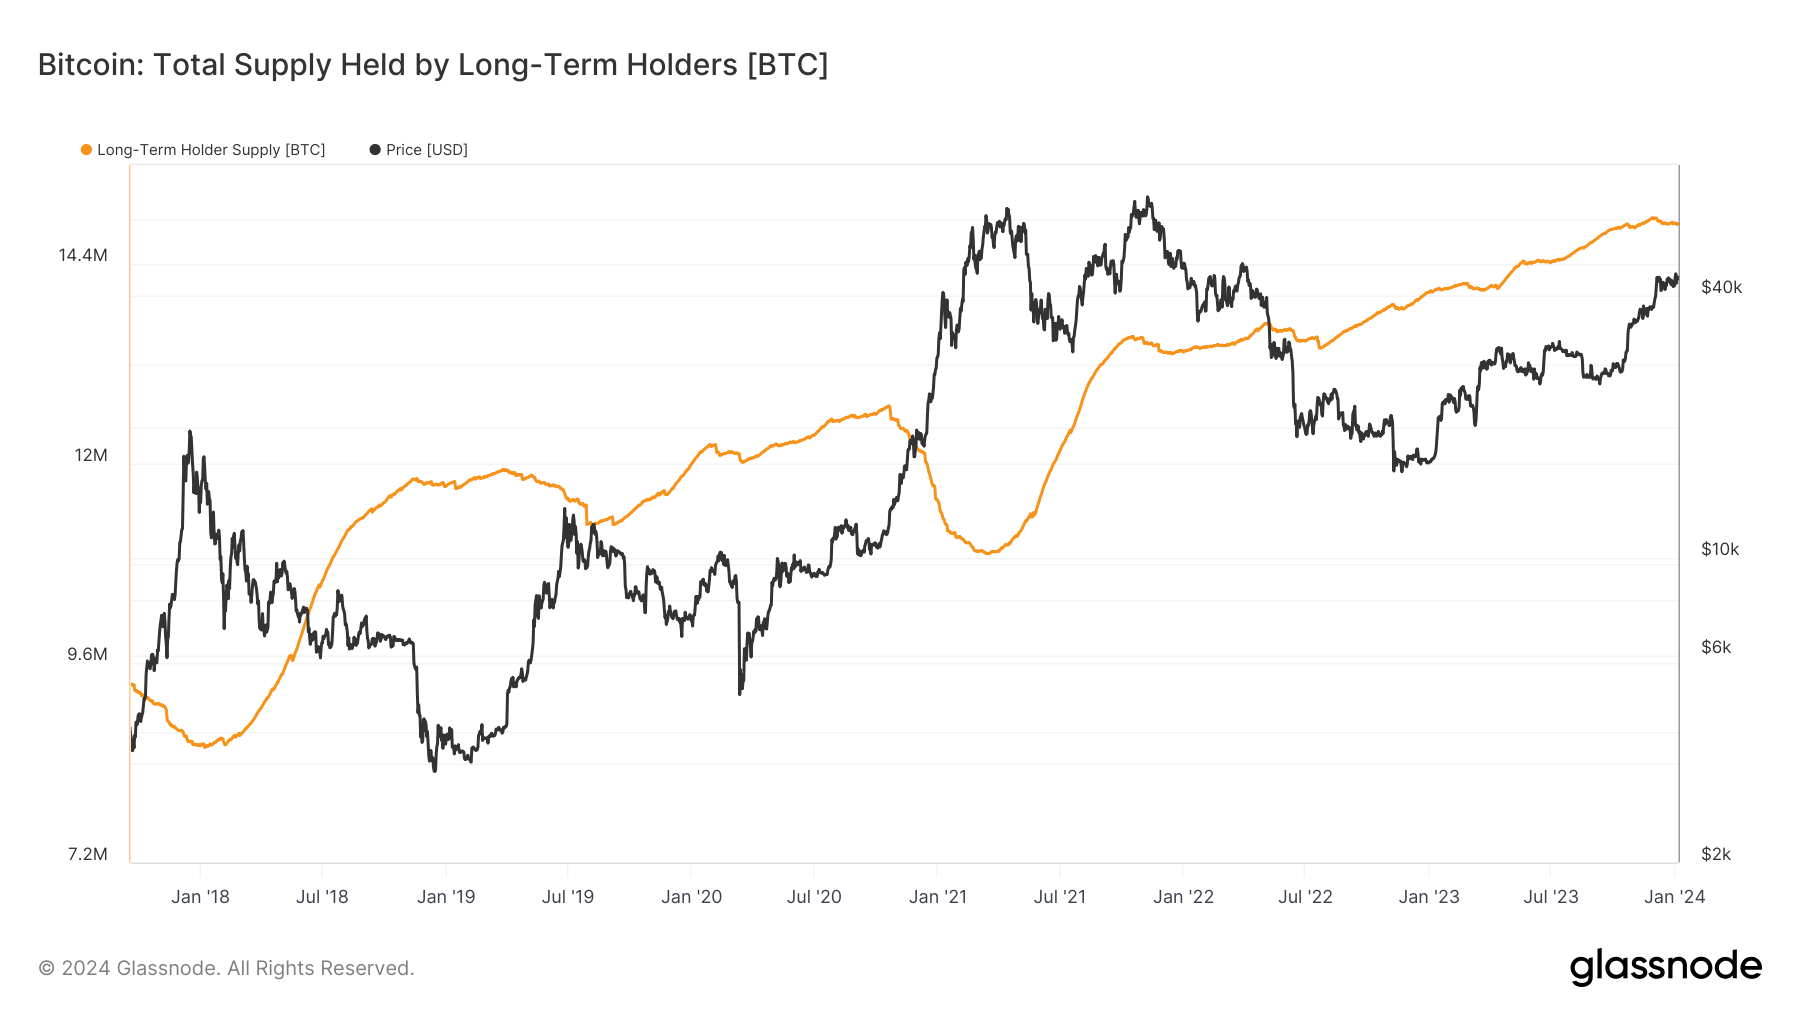 The total amount of circulating supply held by long term holders. Long- and Short-Term Holder supply is defined with respect to the entity'saveraged purchasing date with weights given by a logistic functioncentred at an age of 155 days and a transition width of 10 days.